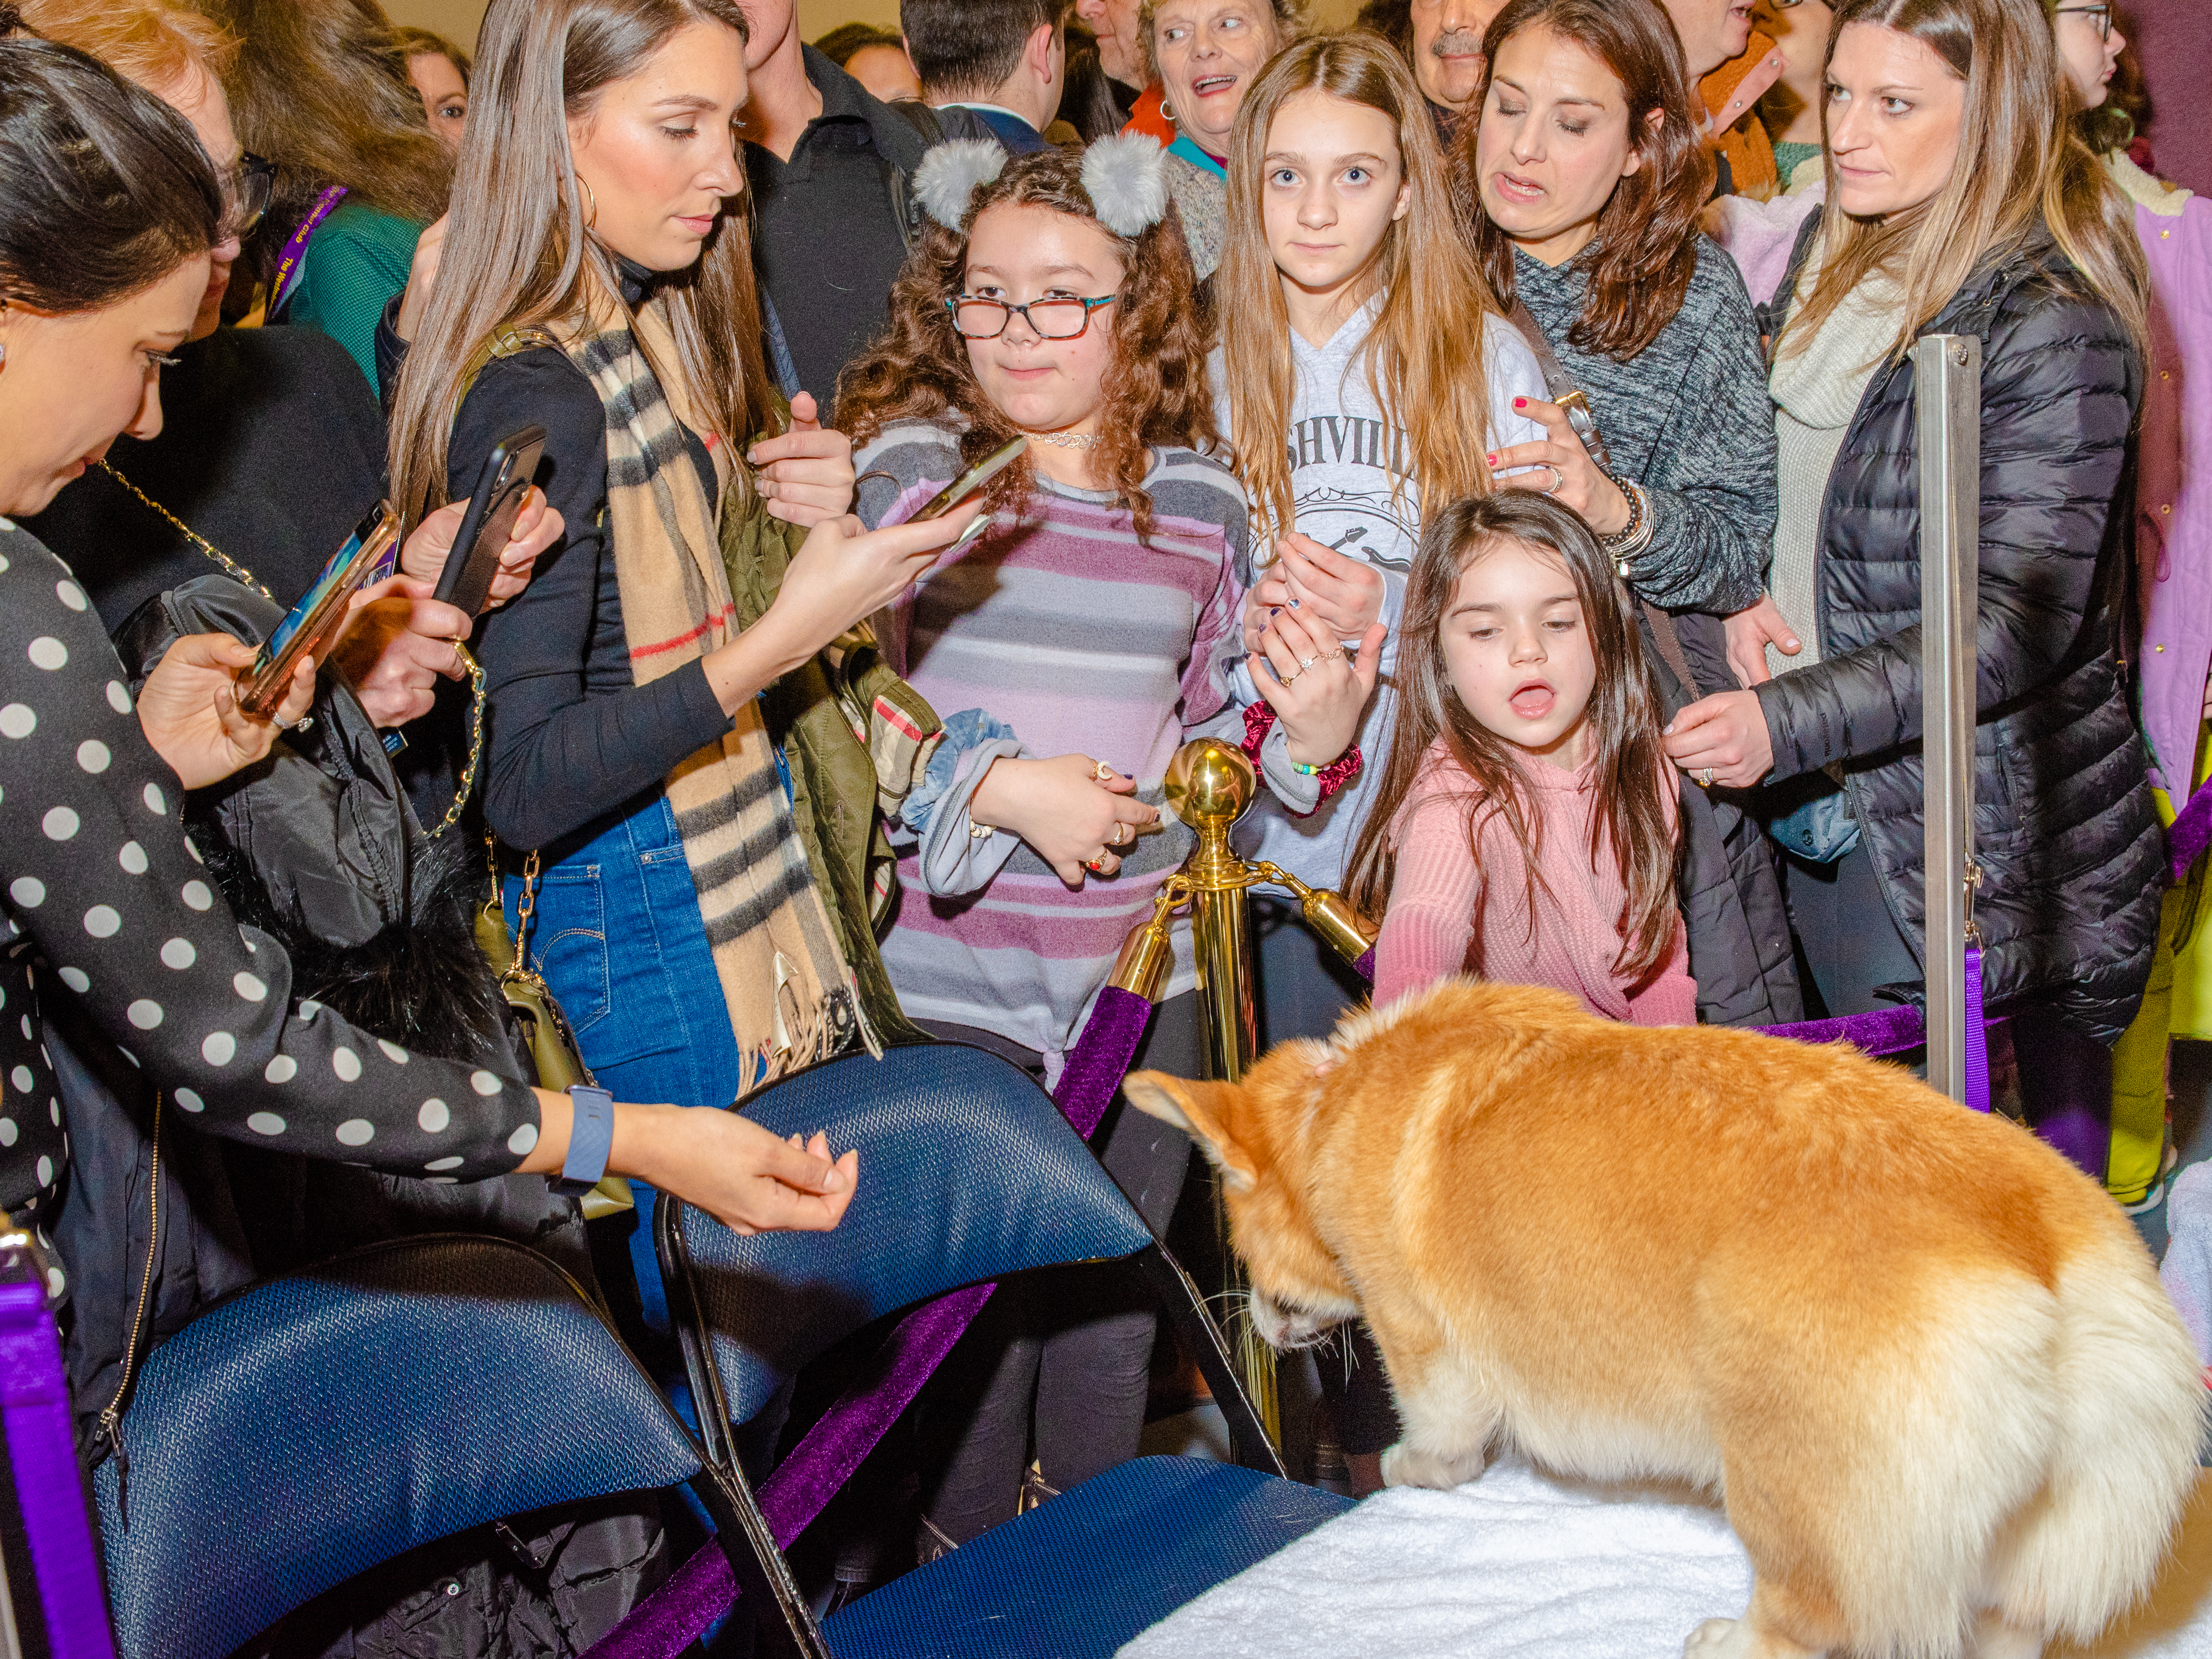 An adoring crowd gathers to see the best in show Corgi at Madison Square Garden (Evan Angelastro for TIME)